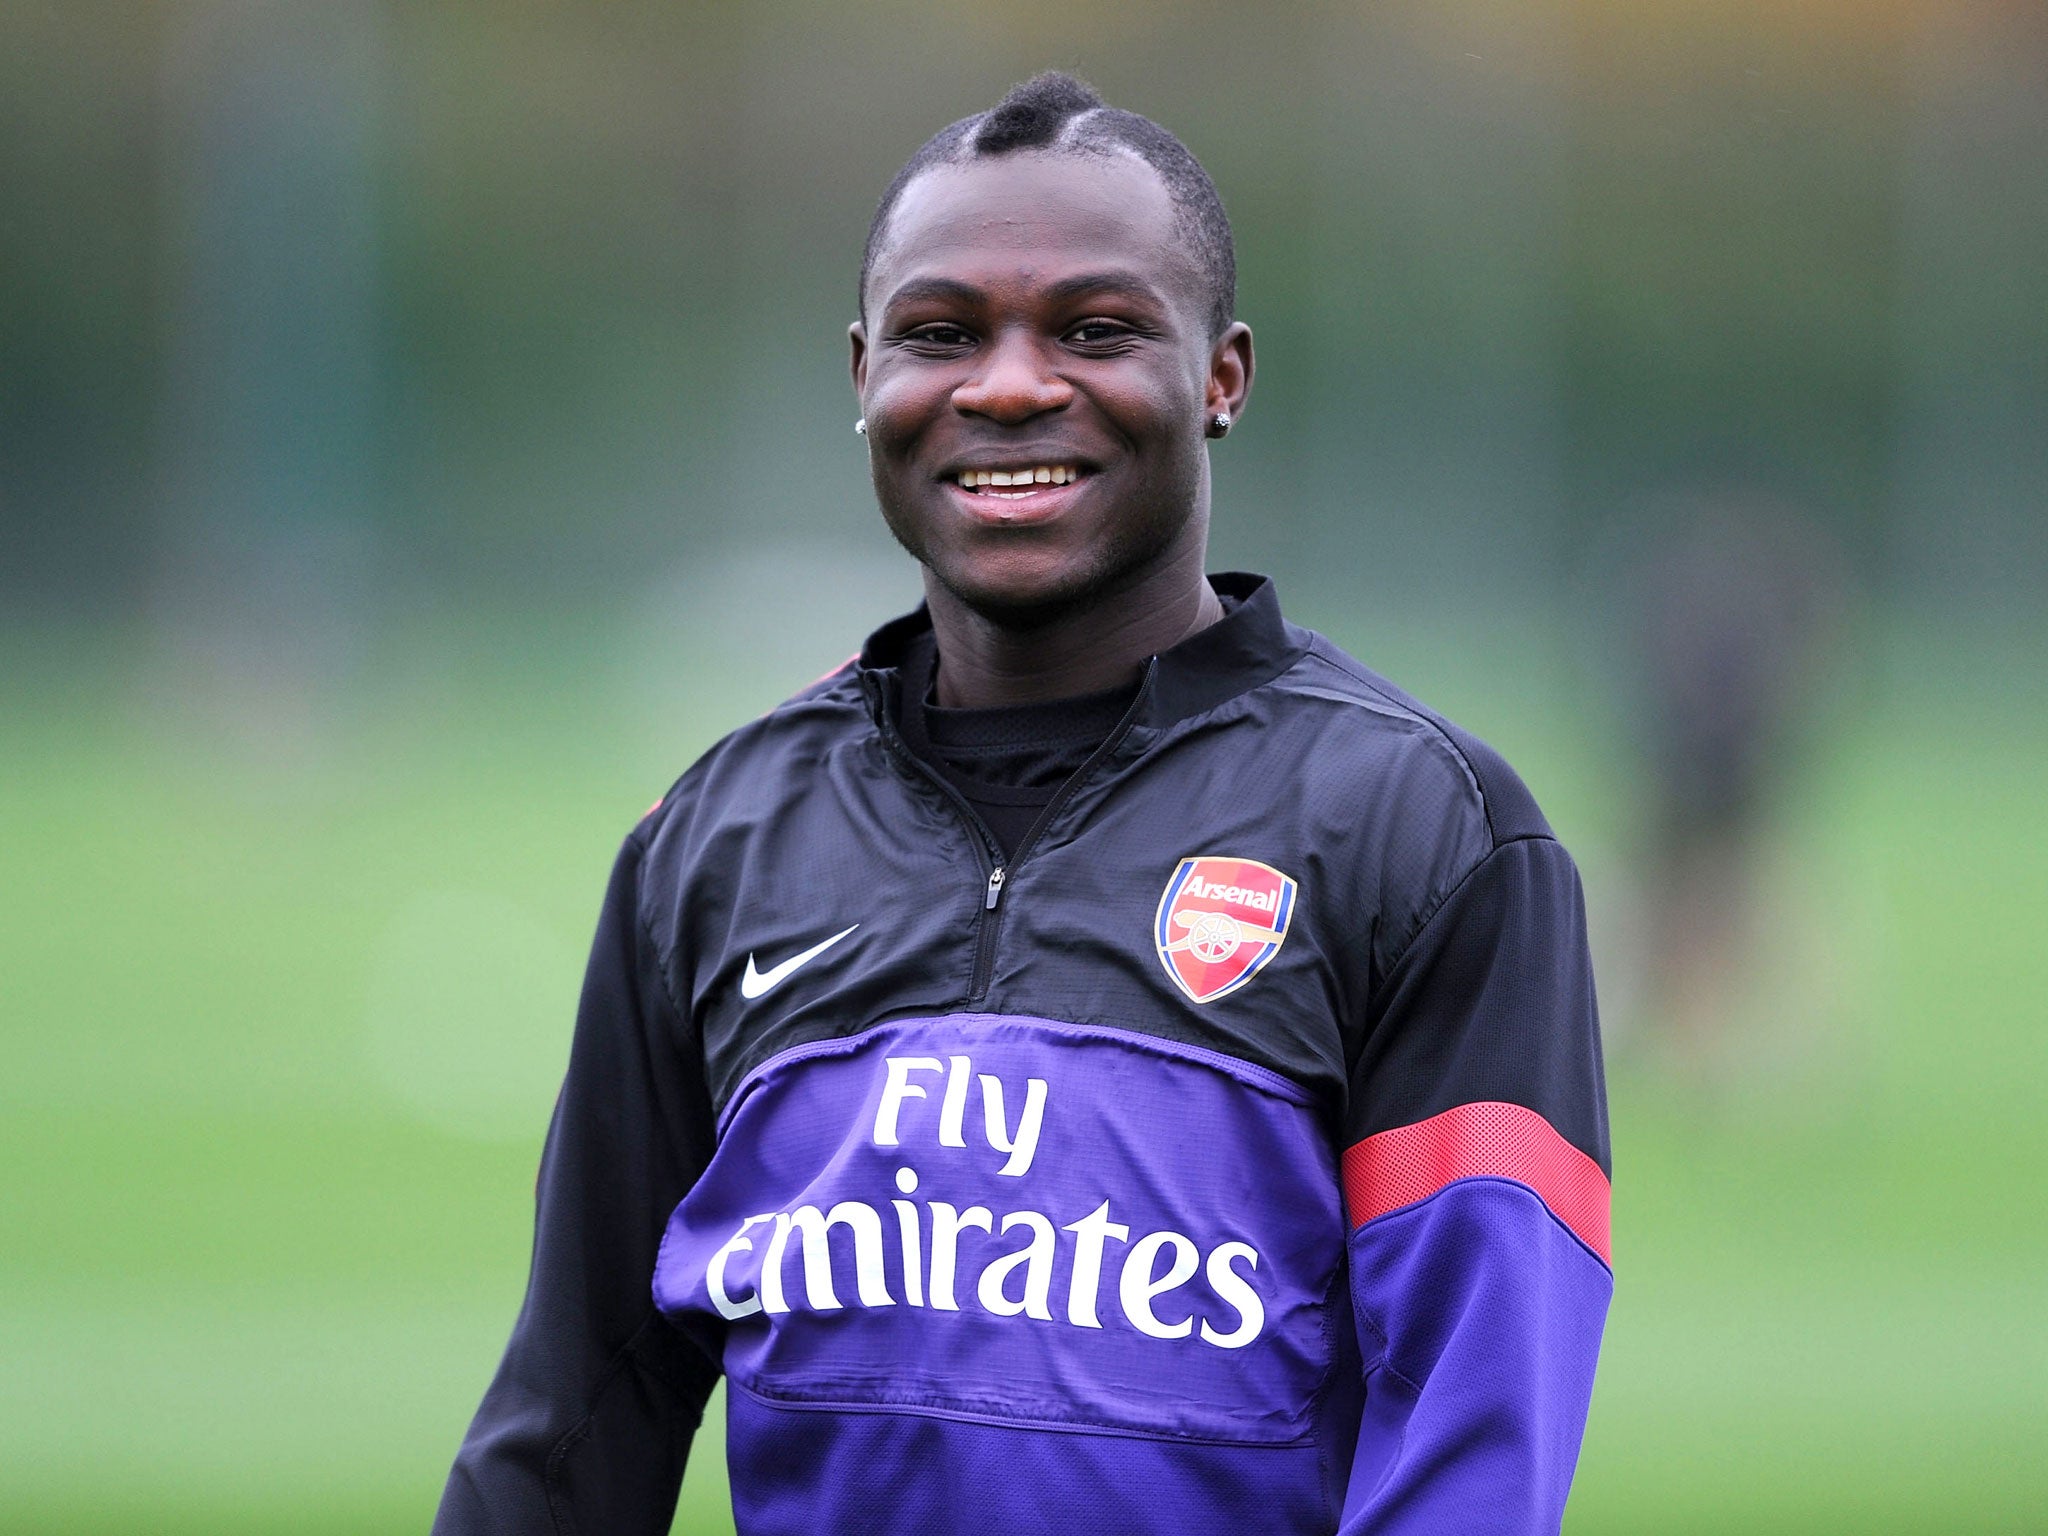 <b>Emmanuel Frimpong</b> argues with, prolific tweeter and Arsenal fan, Piers Morgan:<br/> “@piersmorgan I hope ppl read this and no am rude and u deserve every abuse I give u fatty go and run on the treadmill like I told u.”